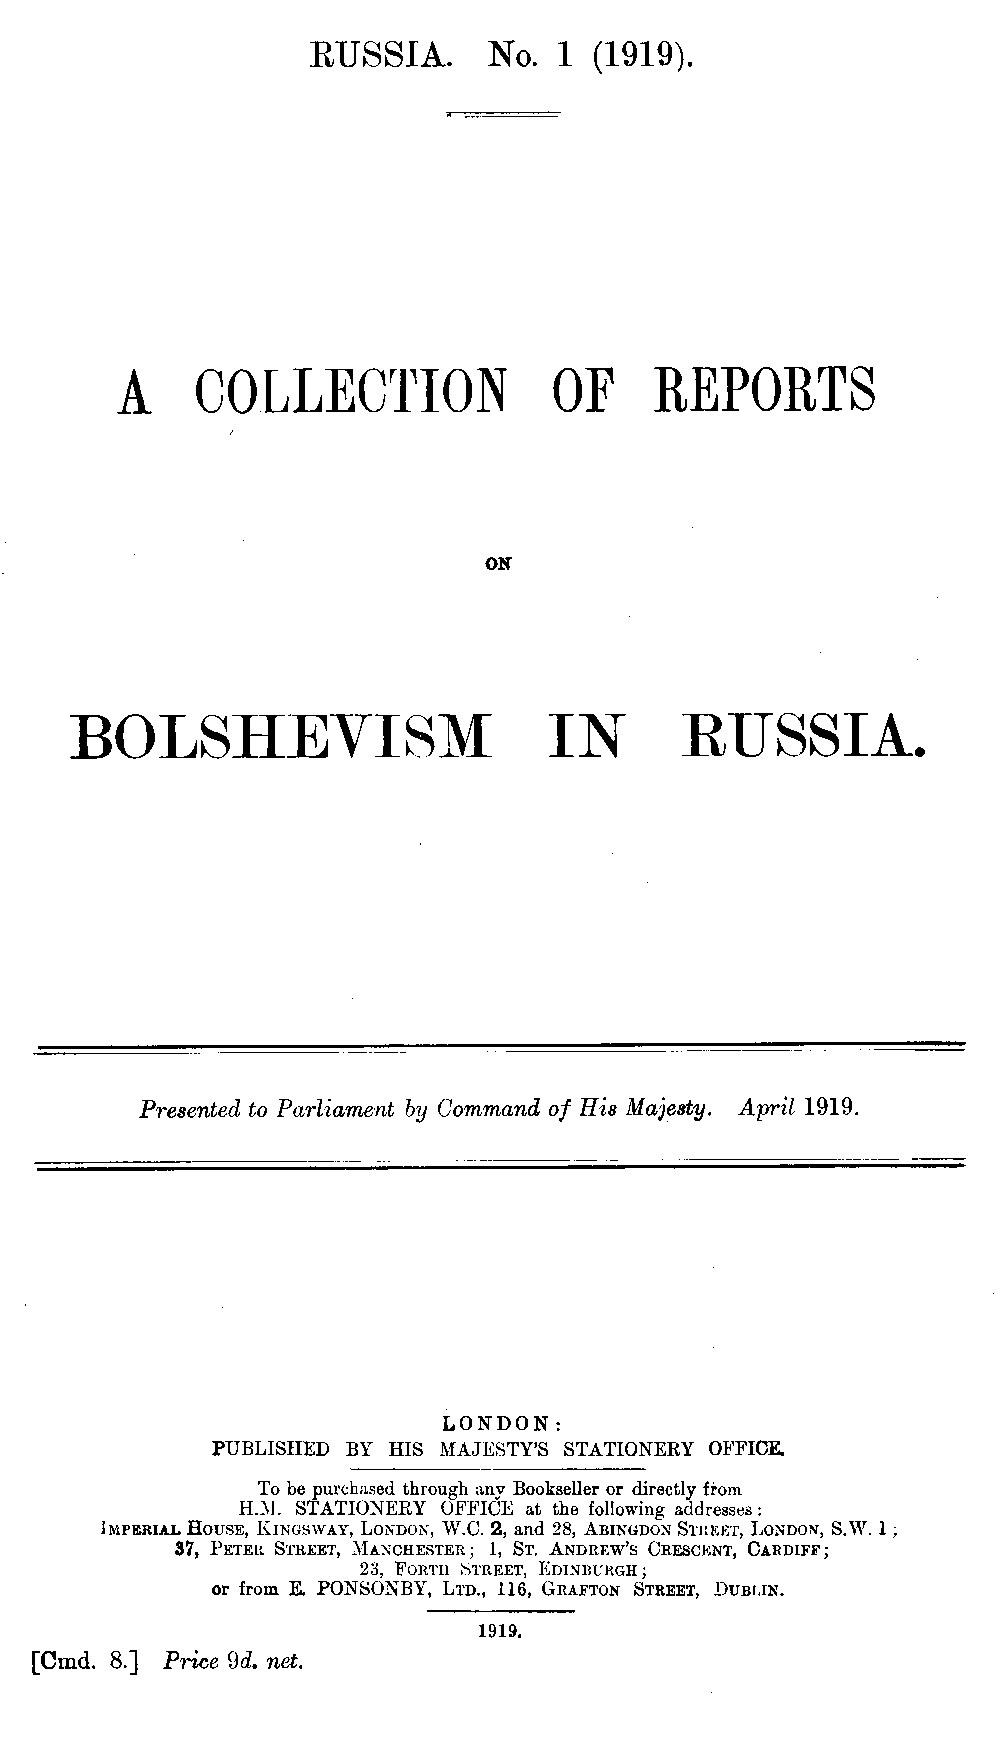 A Collection of Reports on Bolshevism in Russia